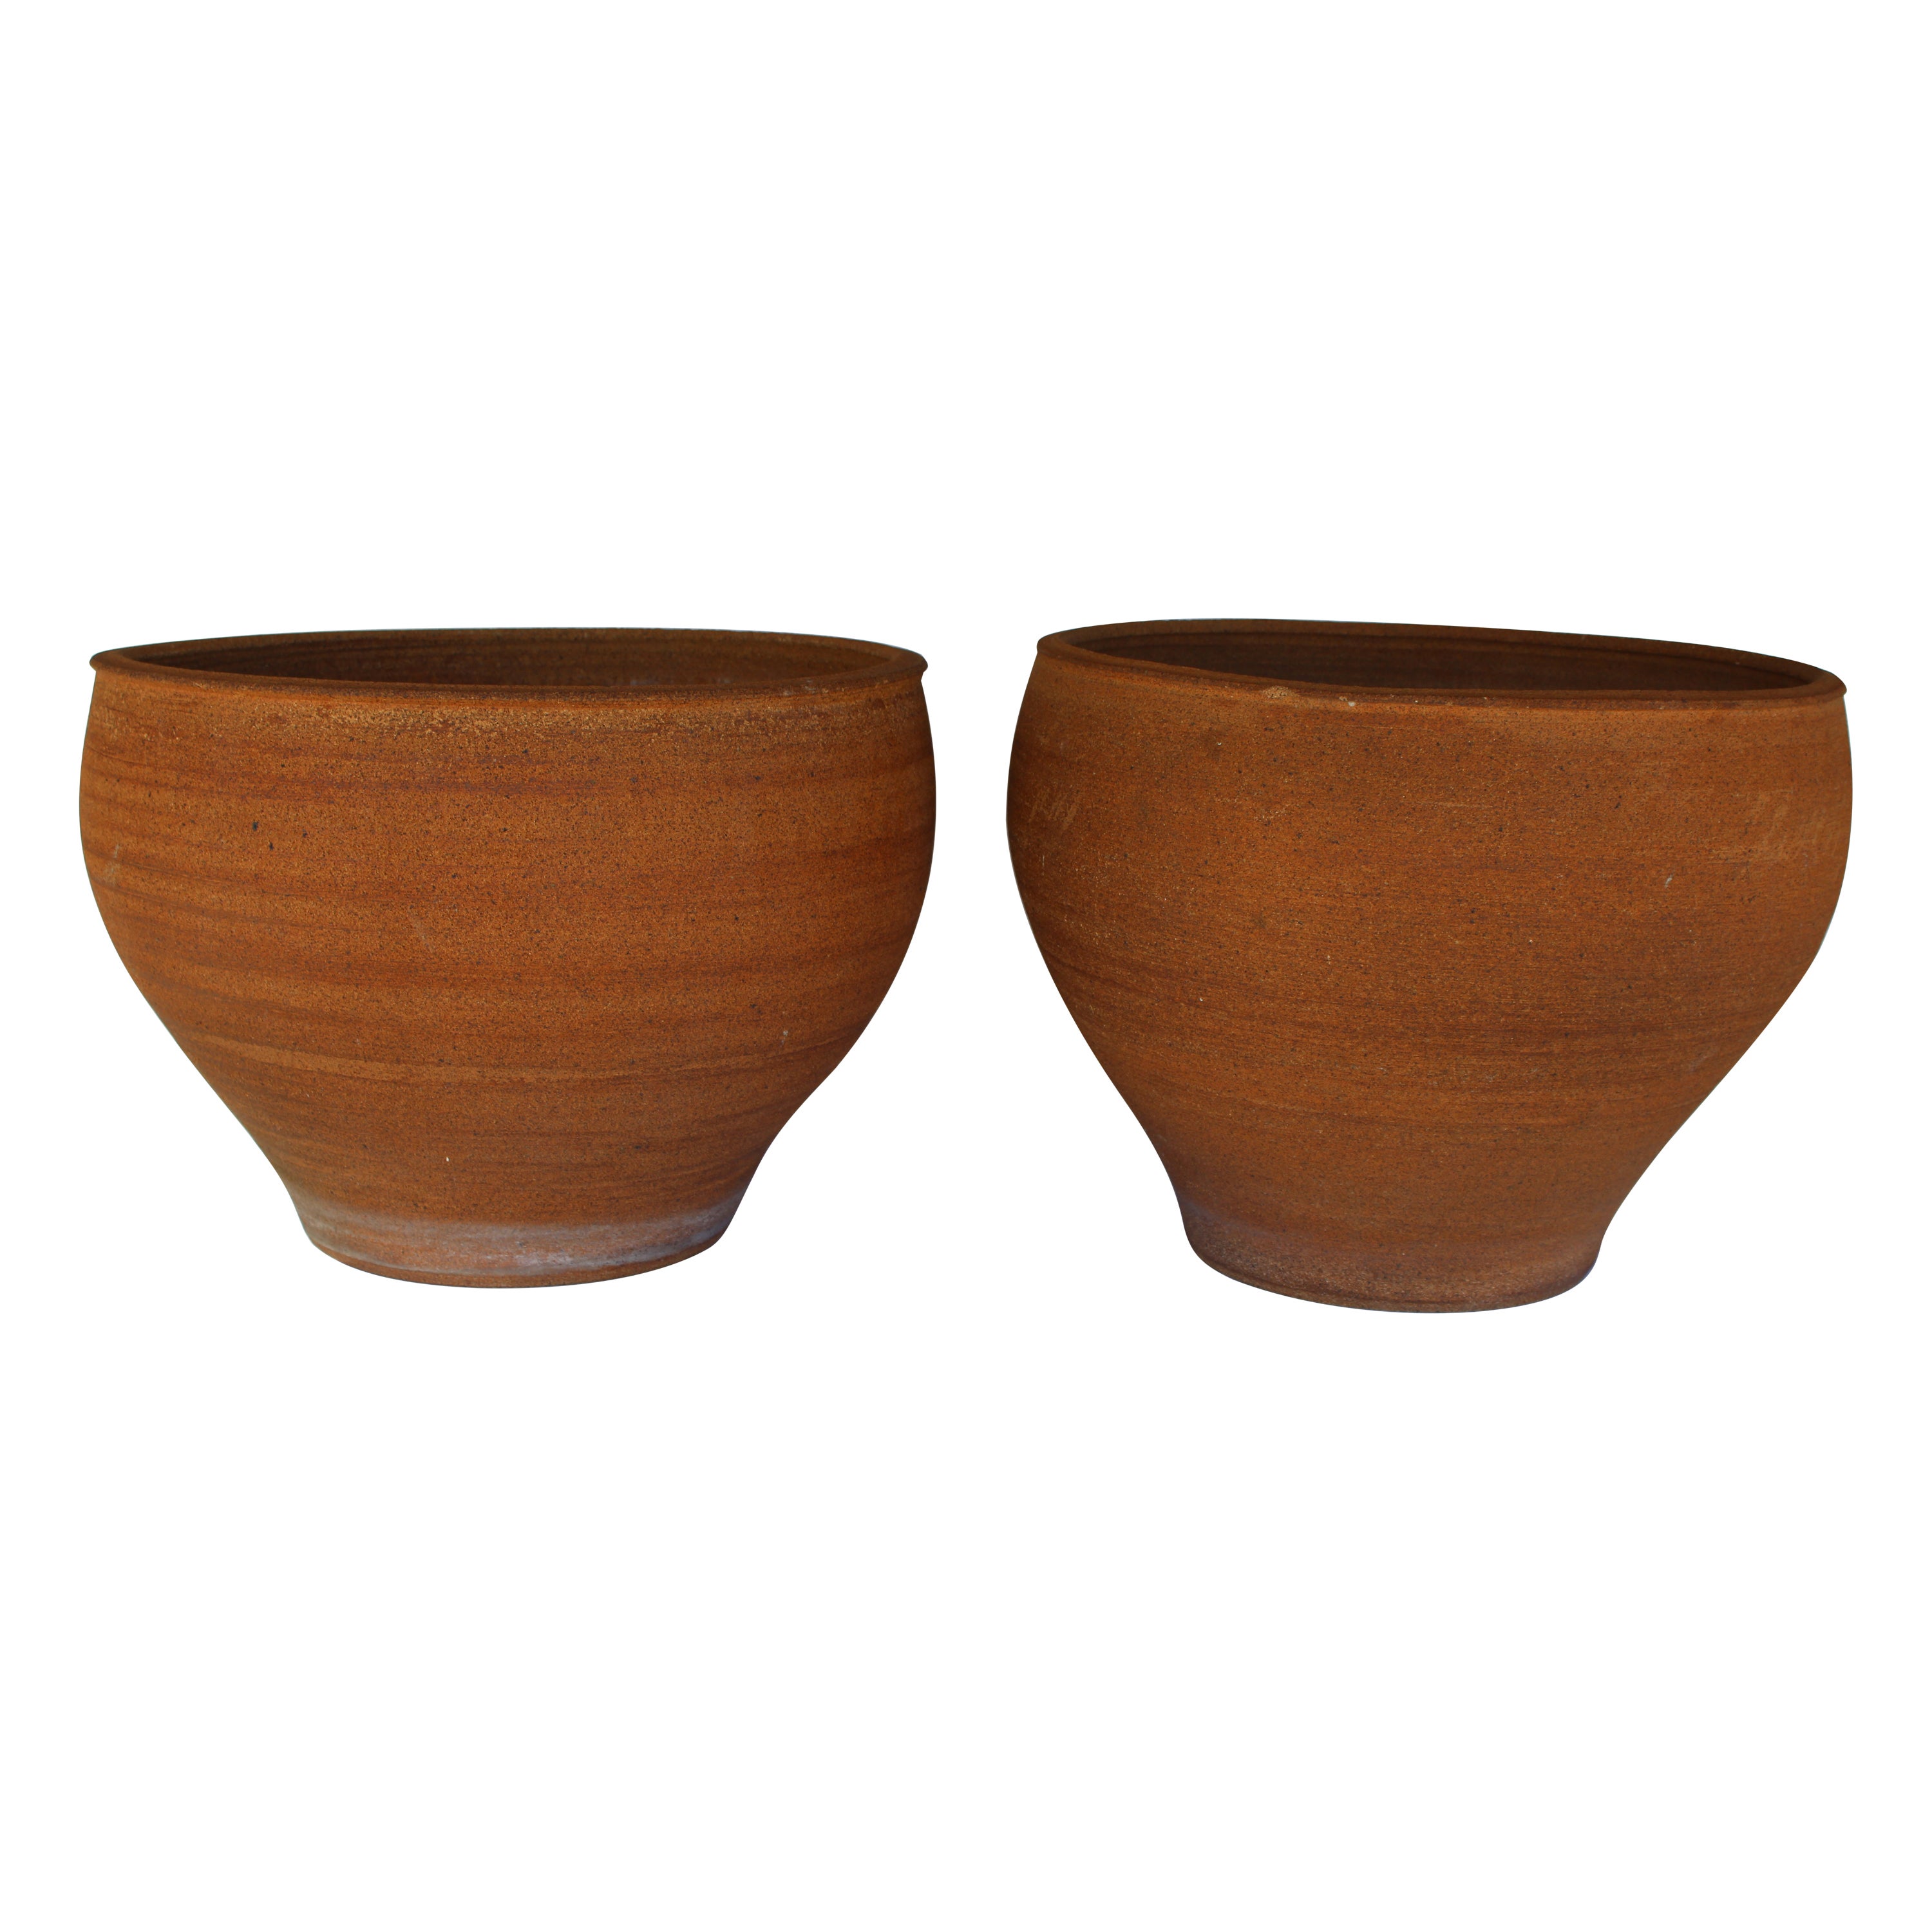 Pair of Stoneware Planters by David Cressey